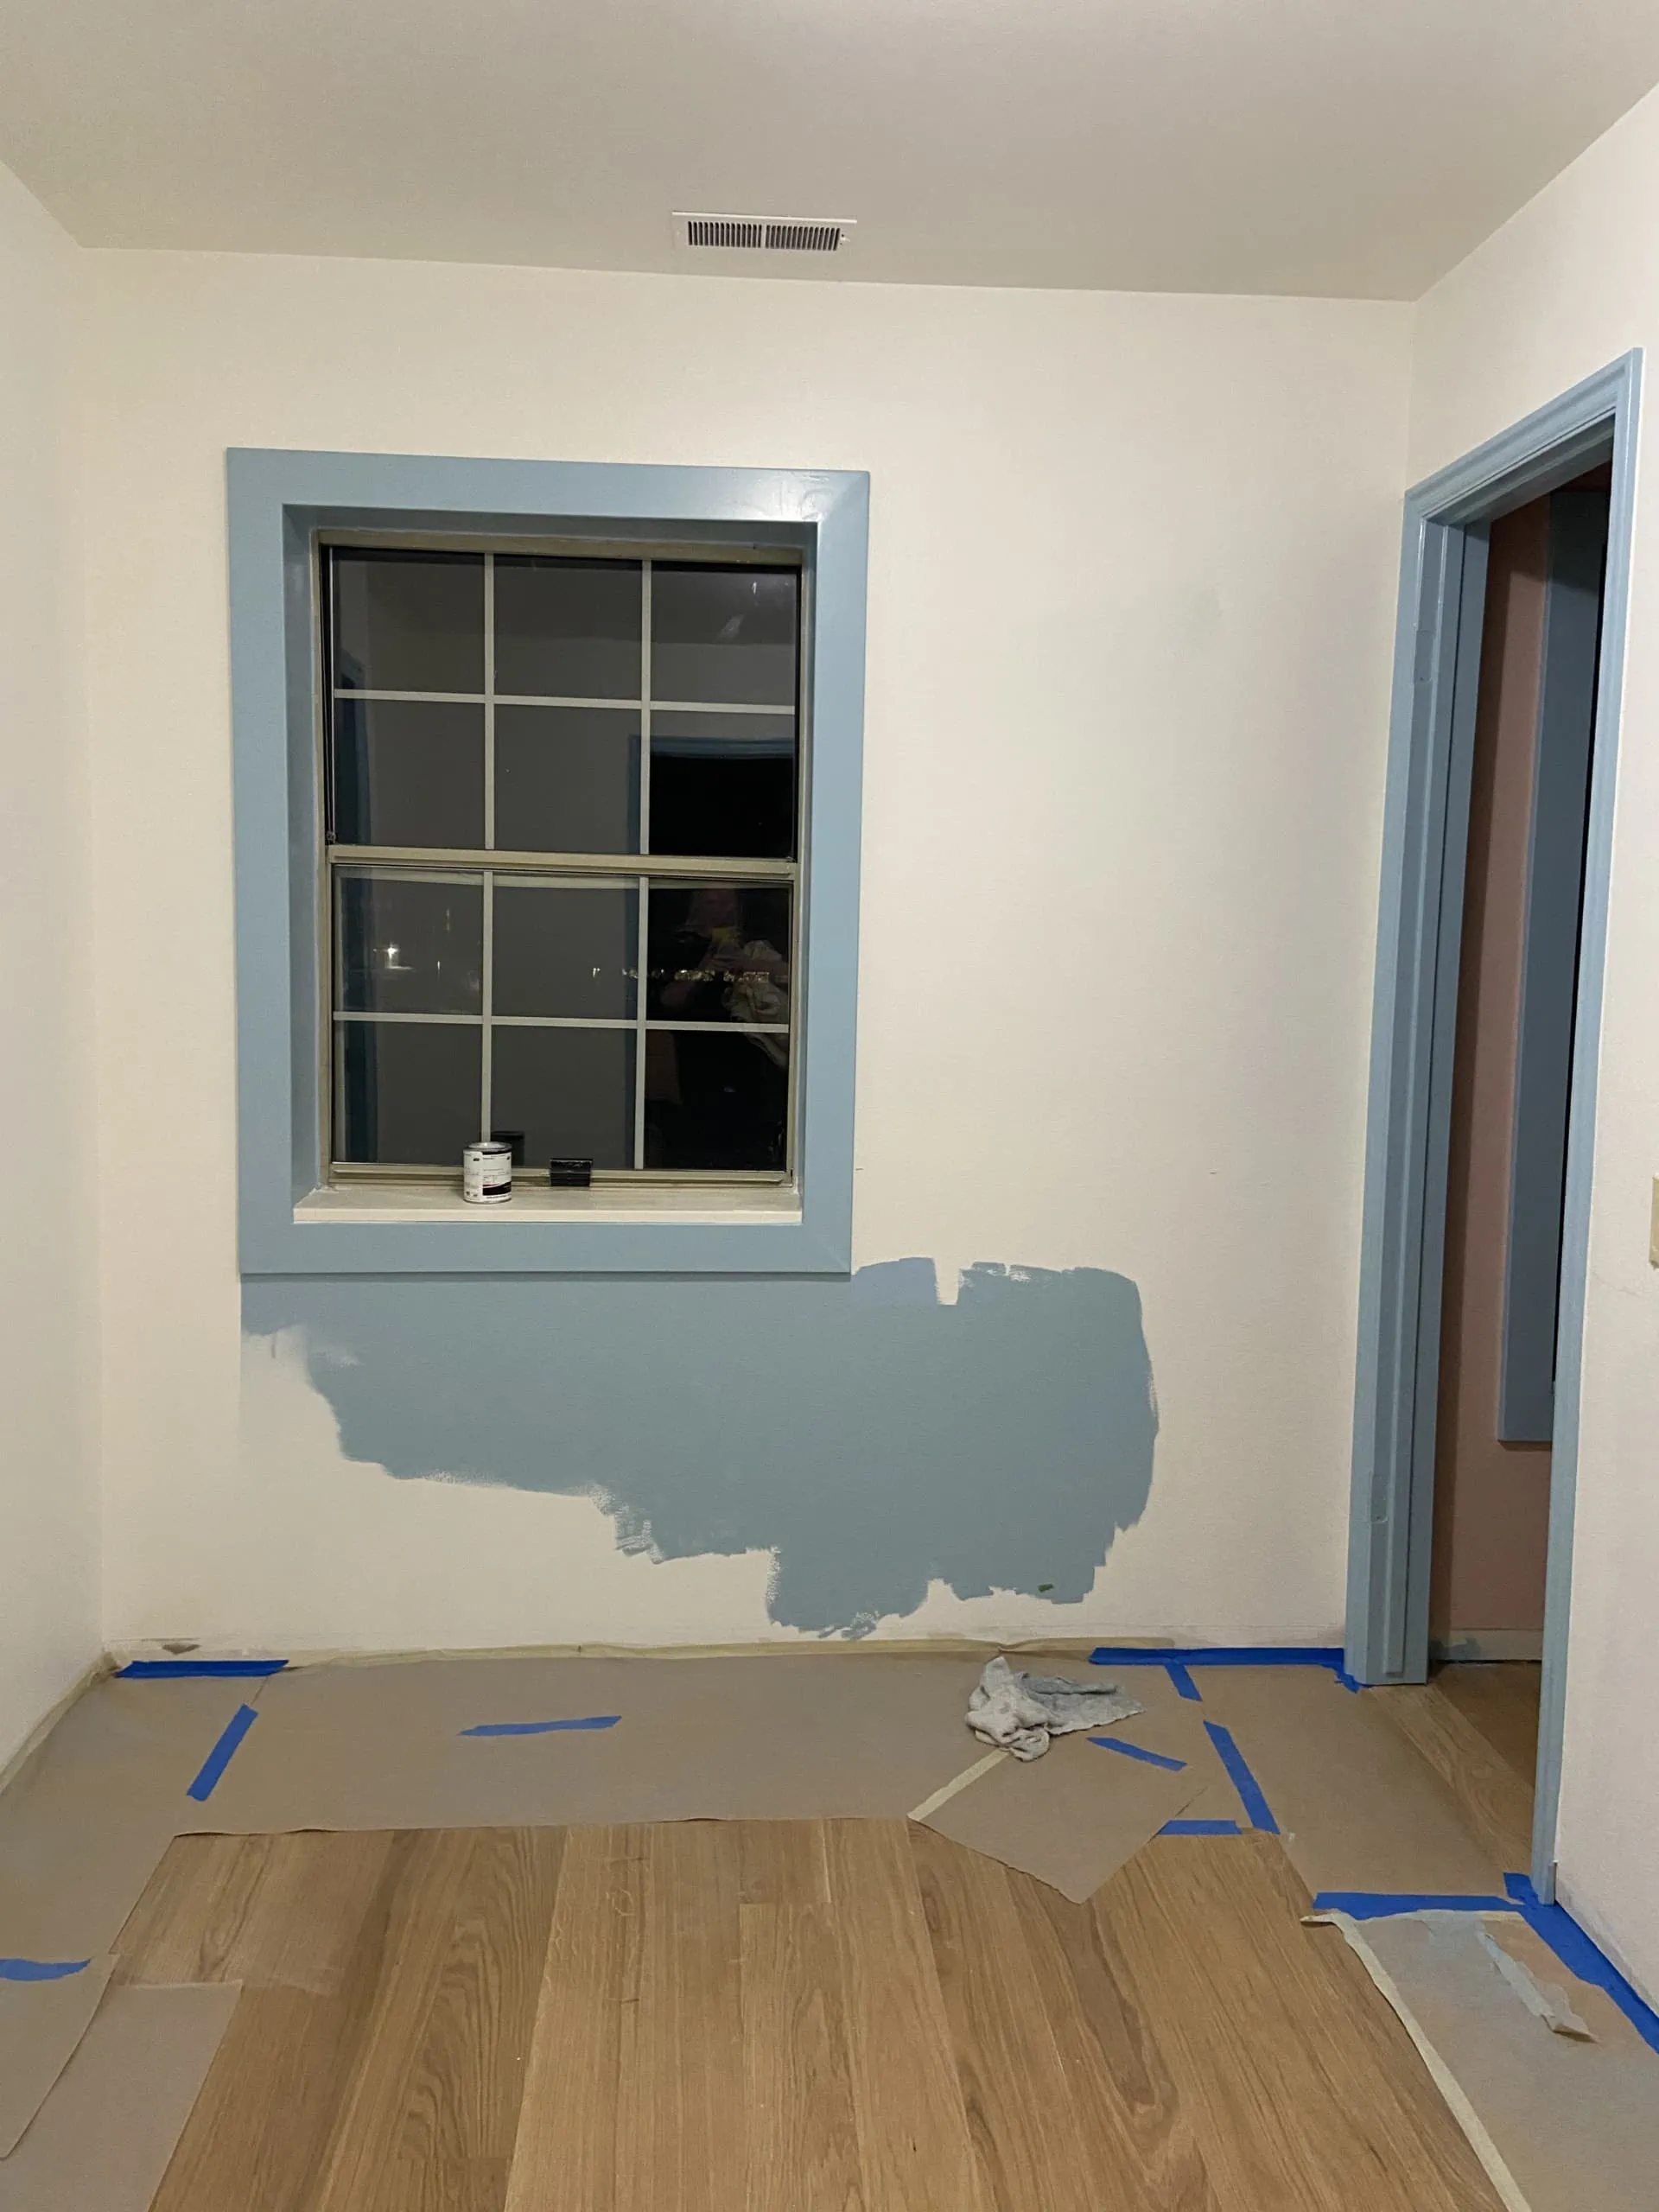 Photo of an interior with wooden floors. The walls are mostly white, but there's some blue paint around the trim and the bottom half of the walls.